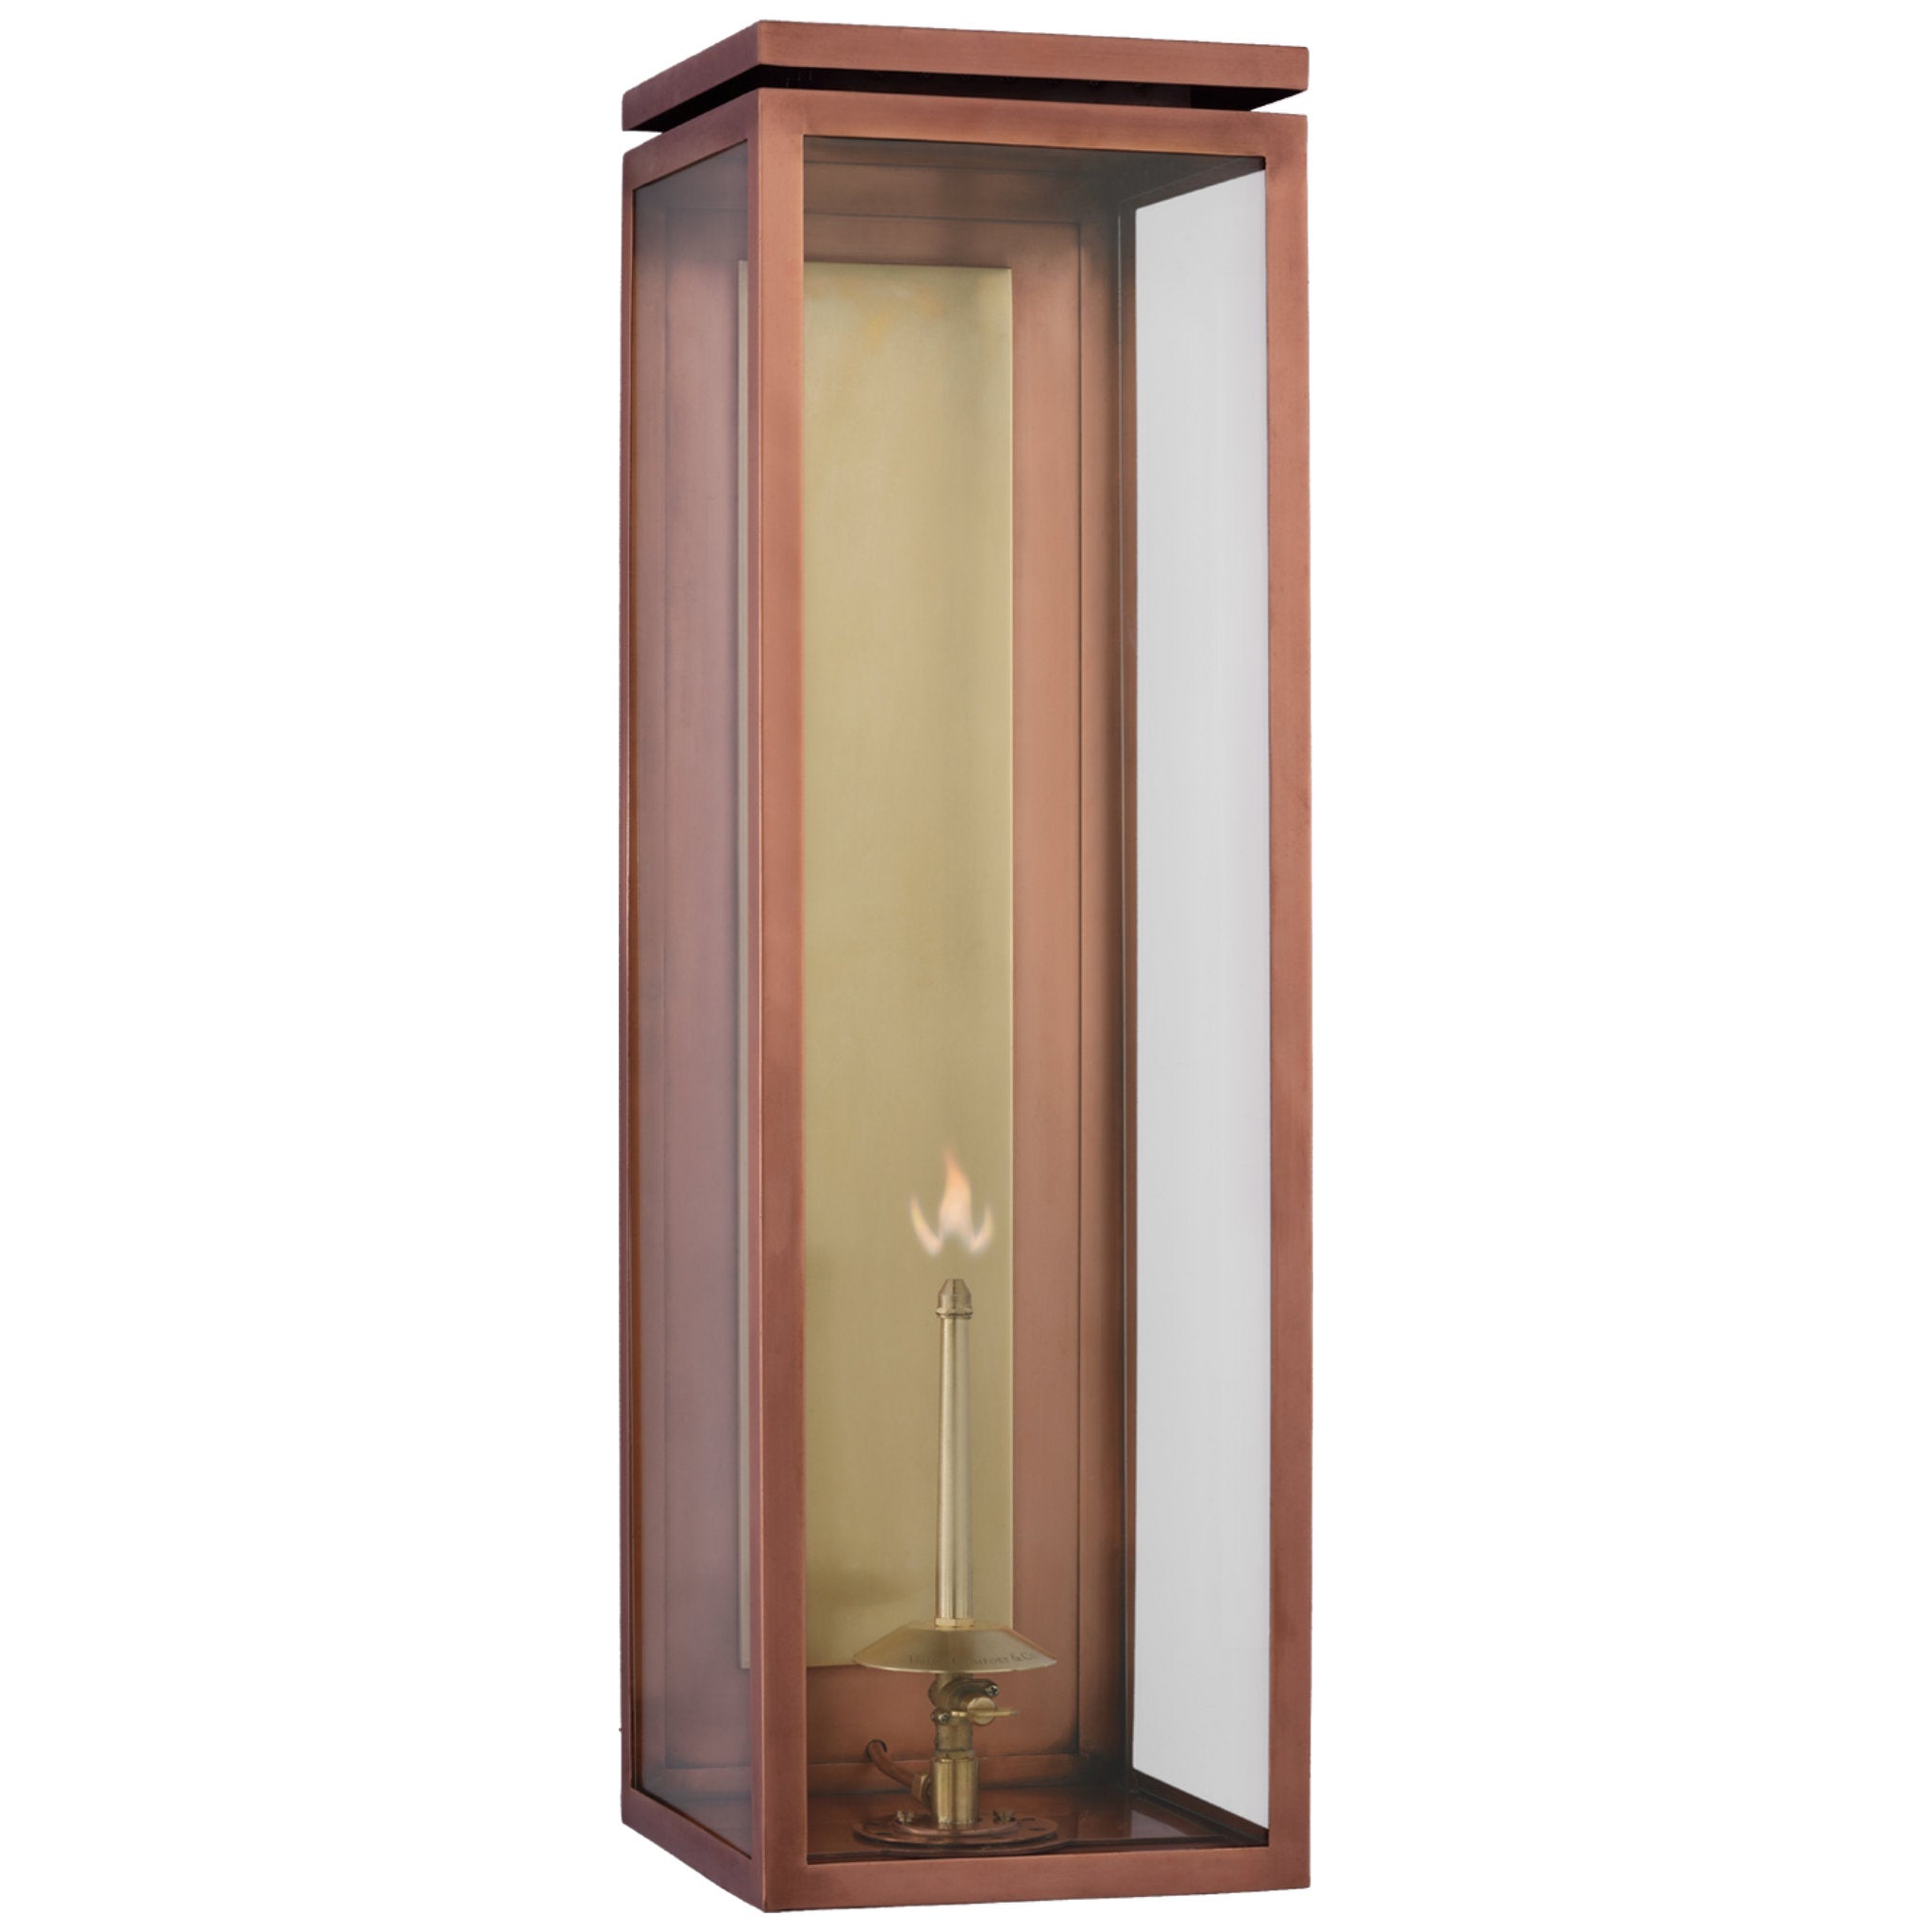 Chapman & Myers Fresno XL 3/4 Gas Wall Lantern in Soft Copper with Clear Glass